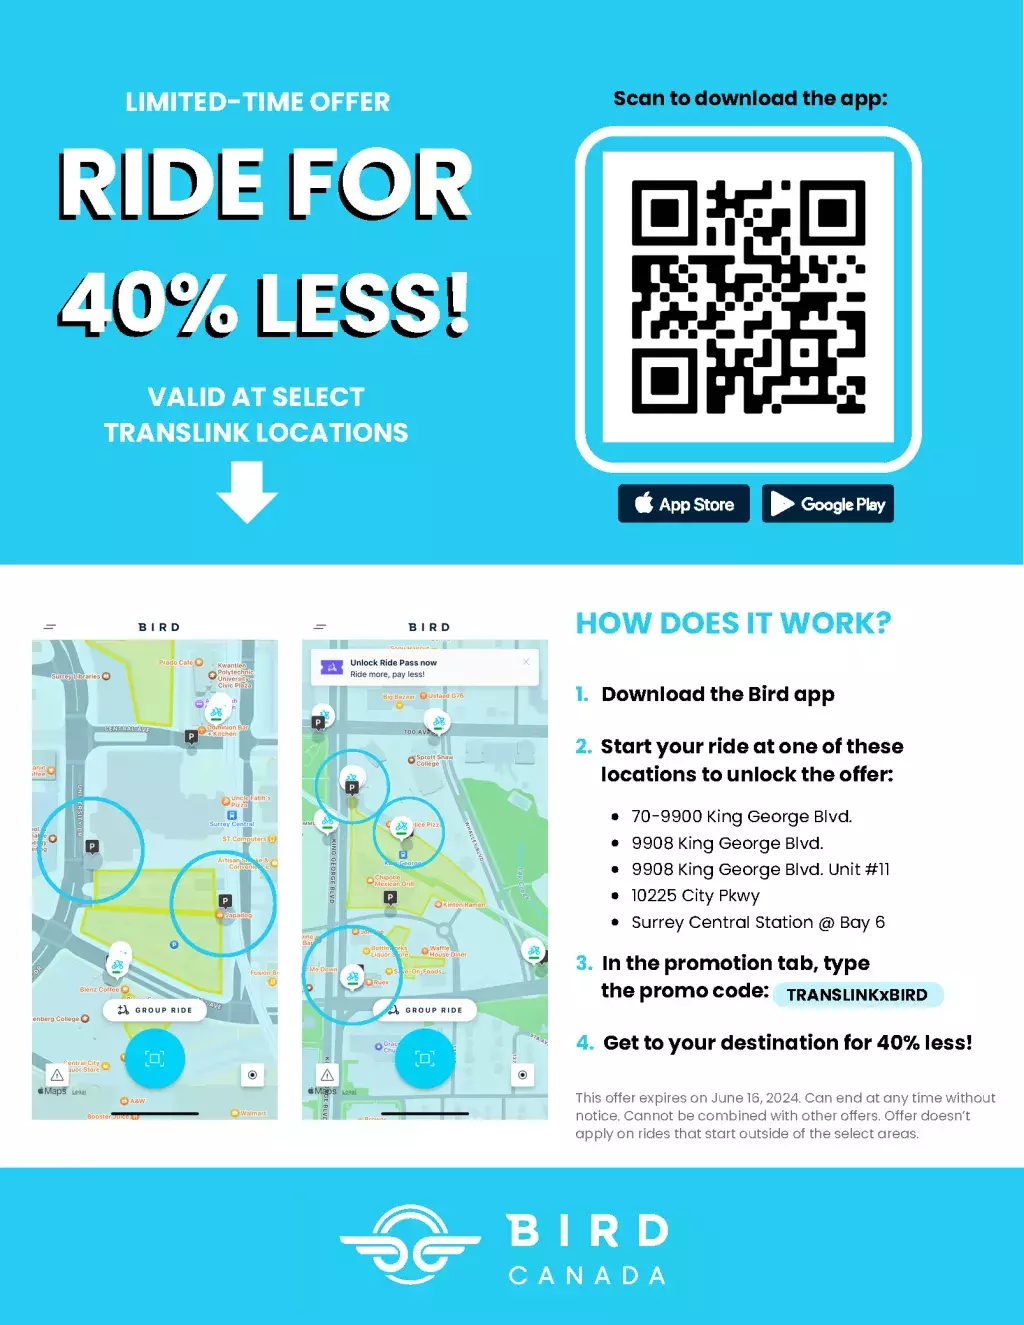 Ride for 40% less with Bird